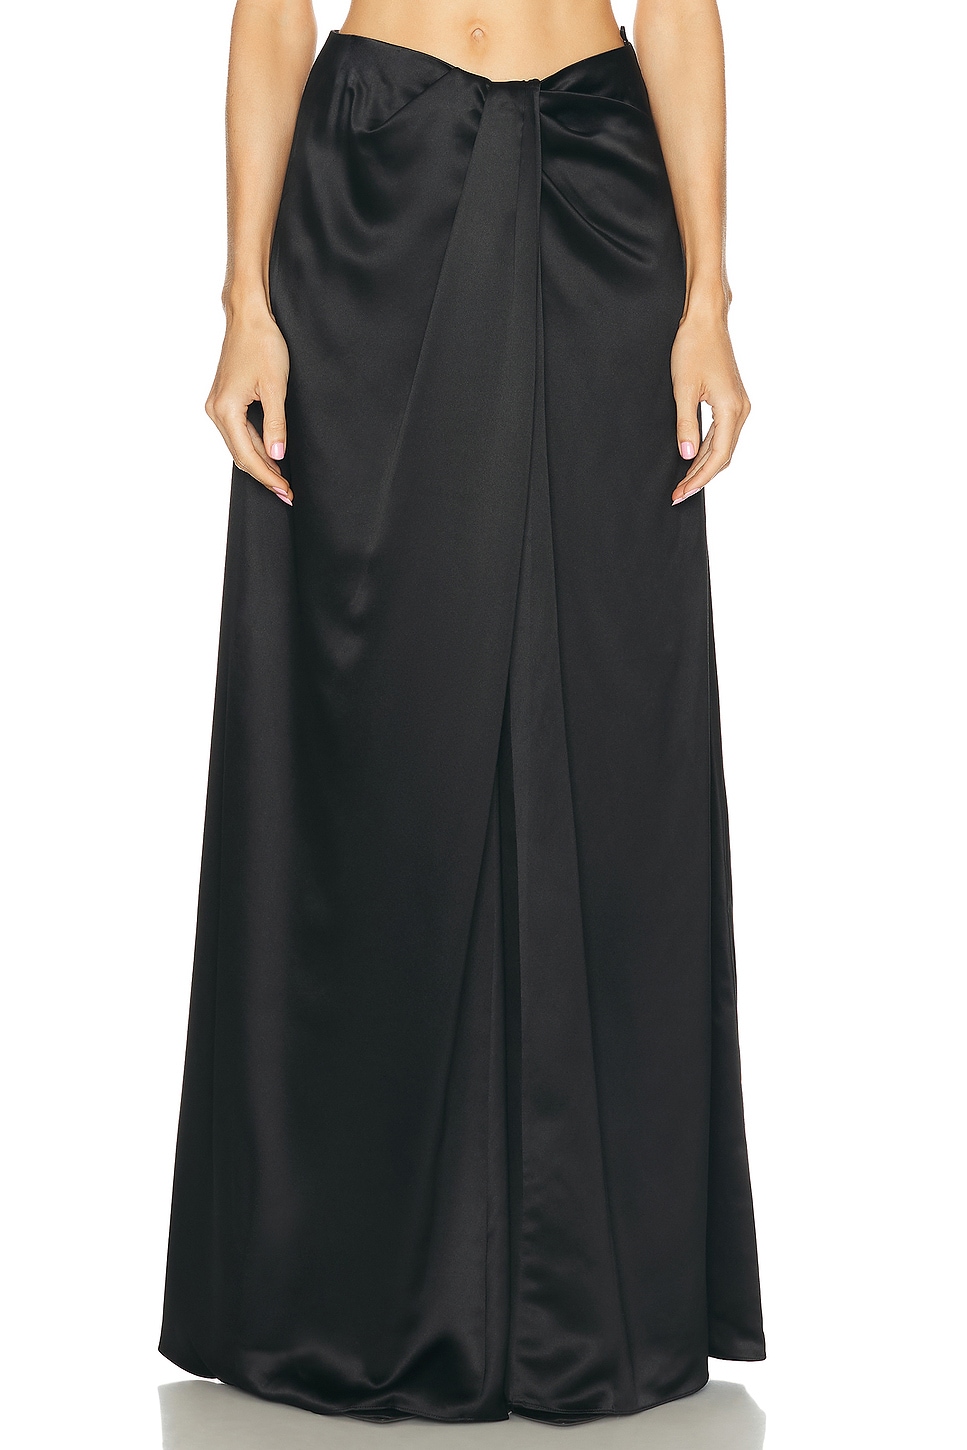 Image 1 of HEIRLOME Leticia Skirt in Black